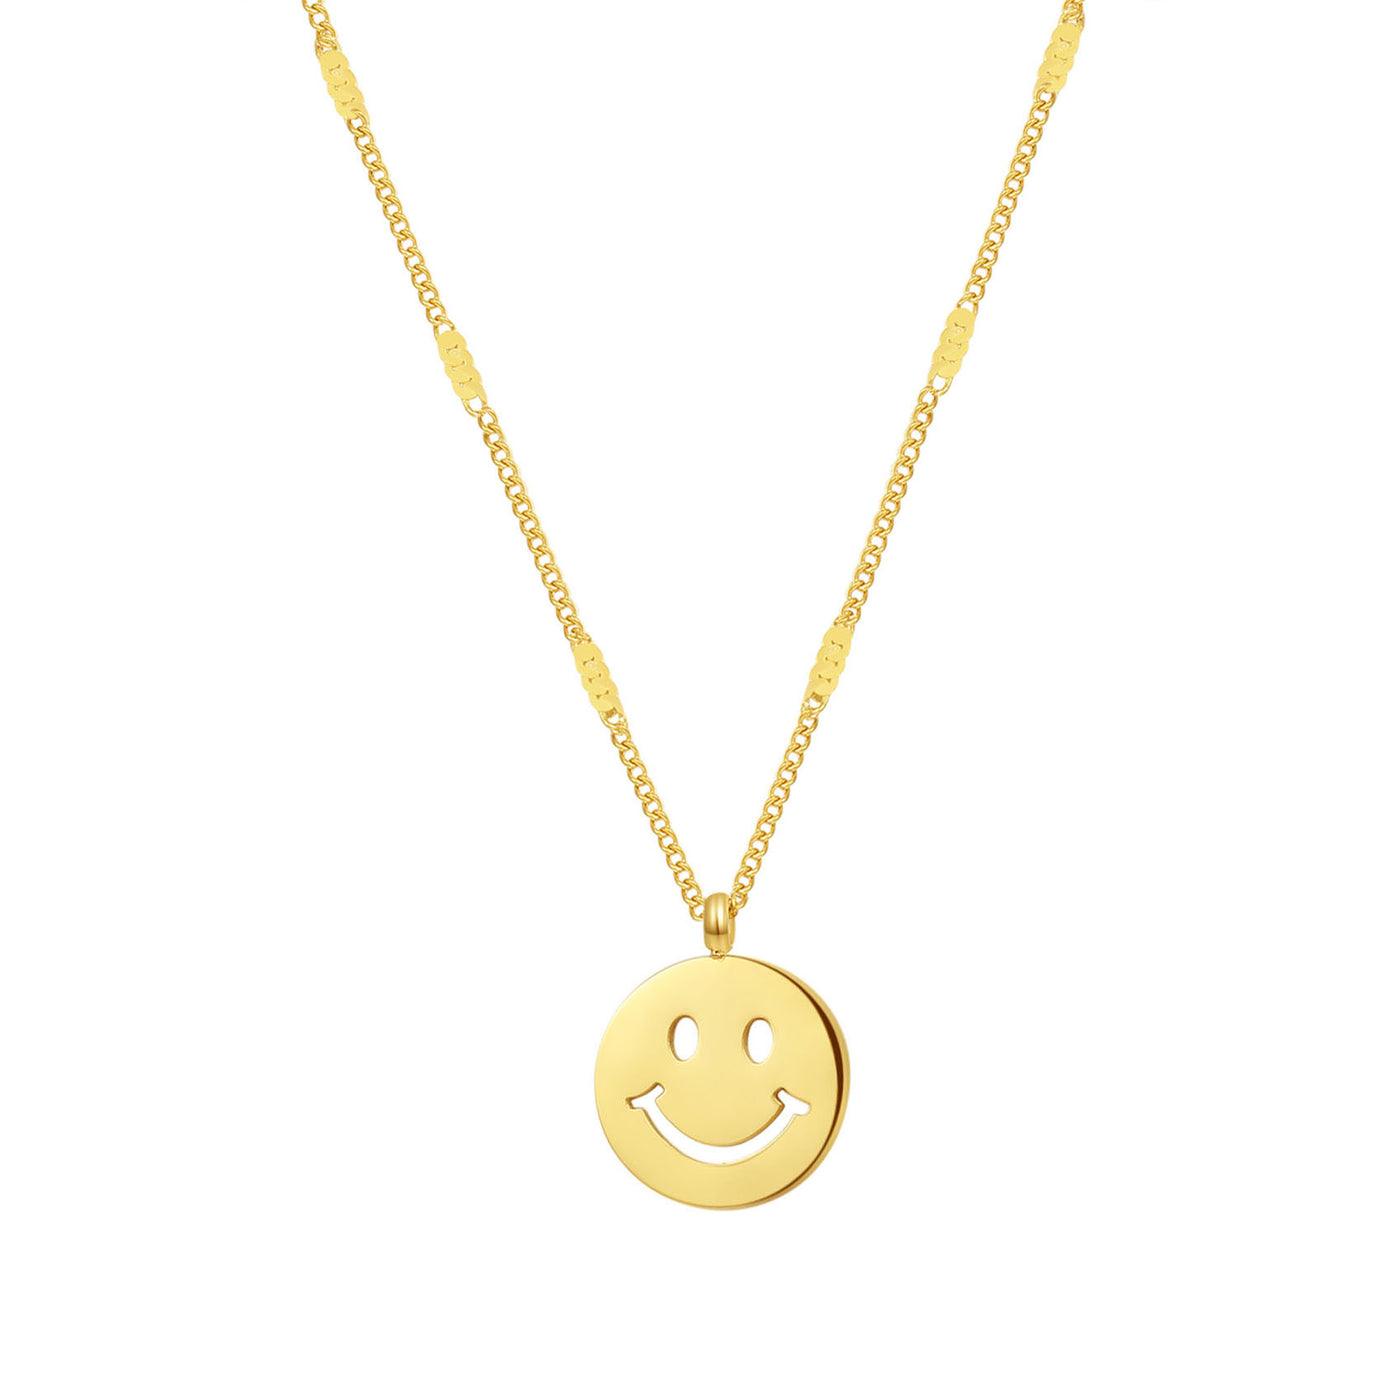 Kette Hey Sterlingsilber Gold Happiness in – Gesicht Smiley Anhänger